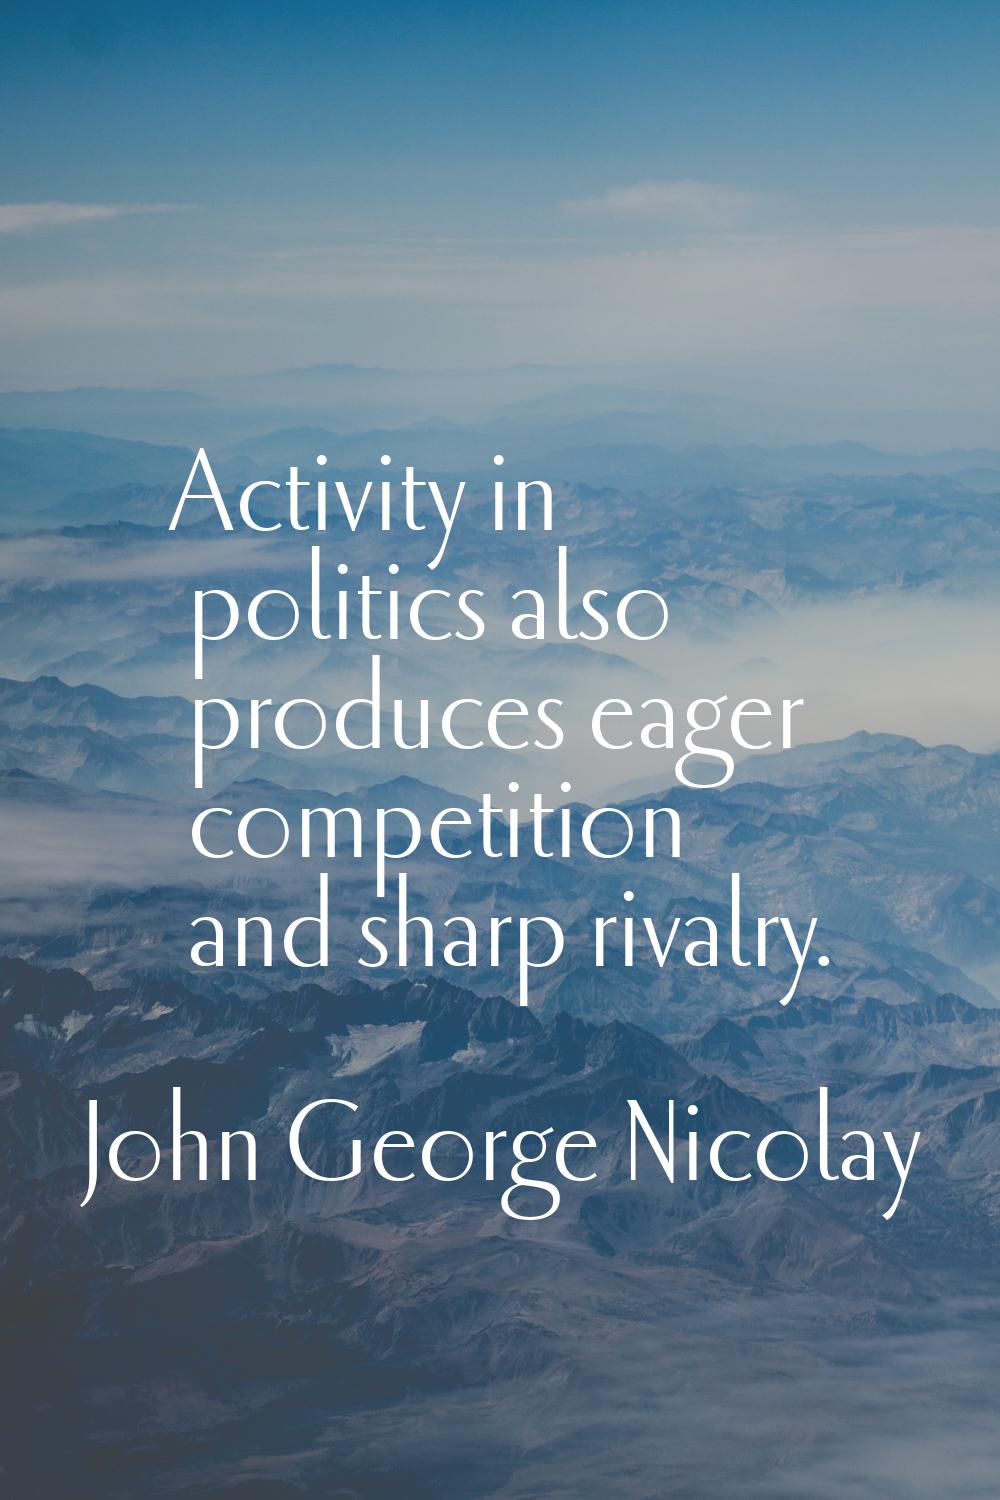 Activity in politics also produces eager competition and sharp rivalry.